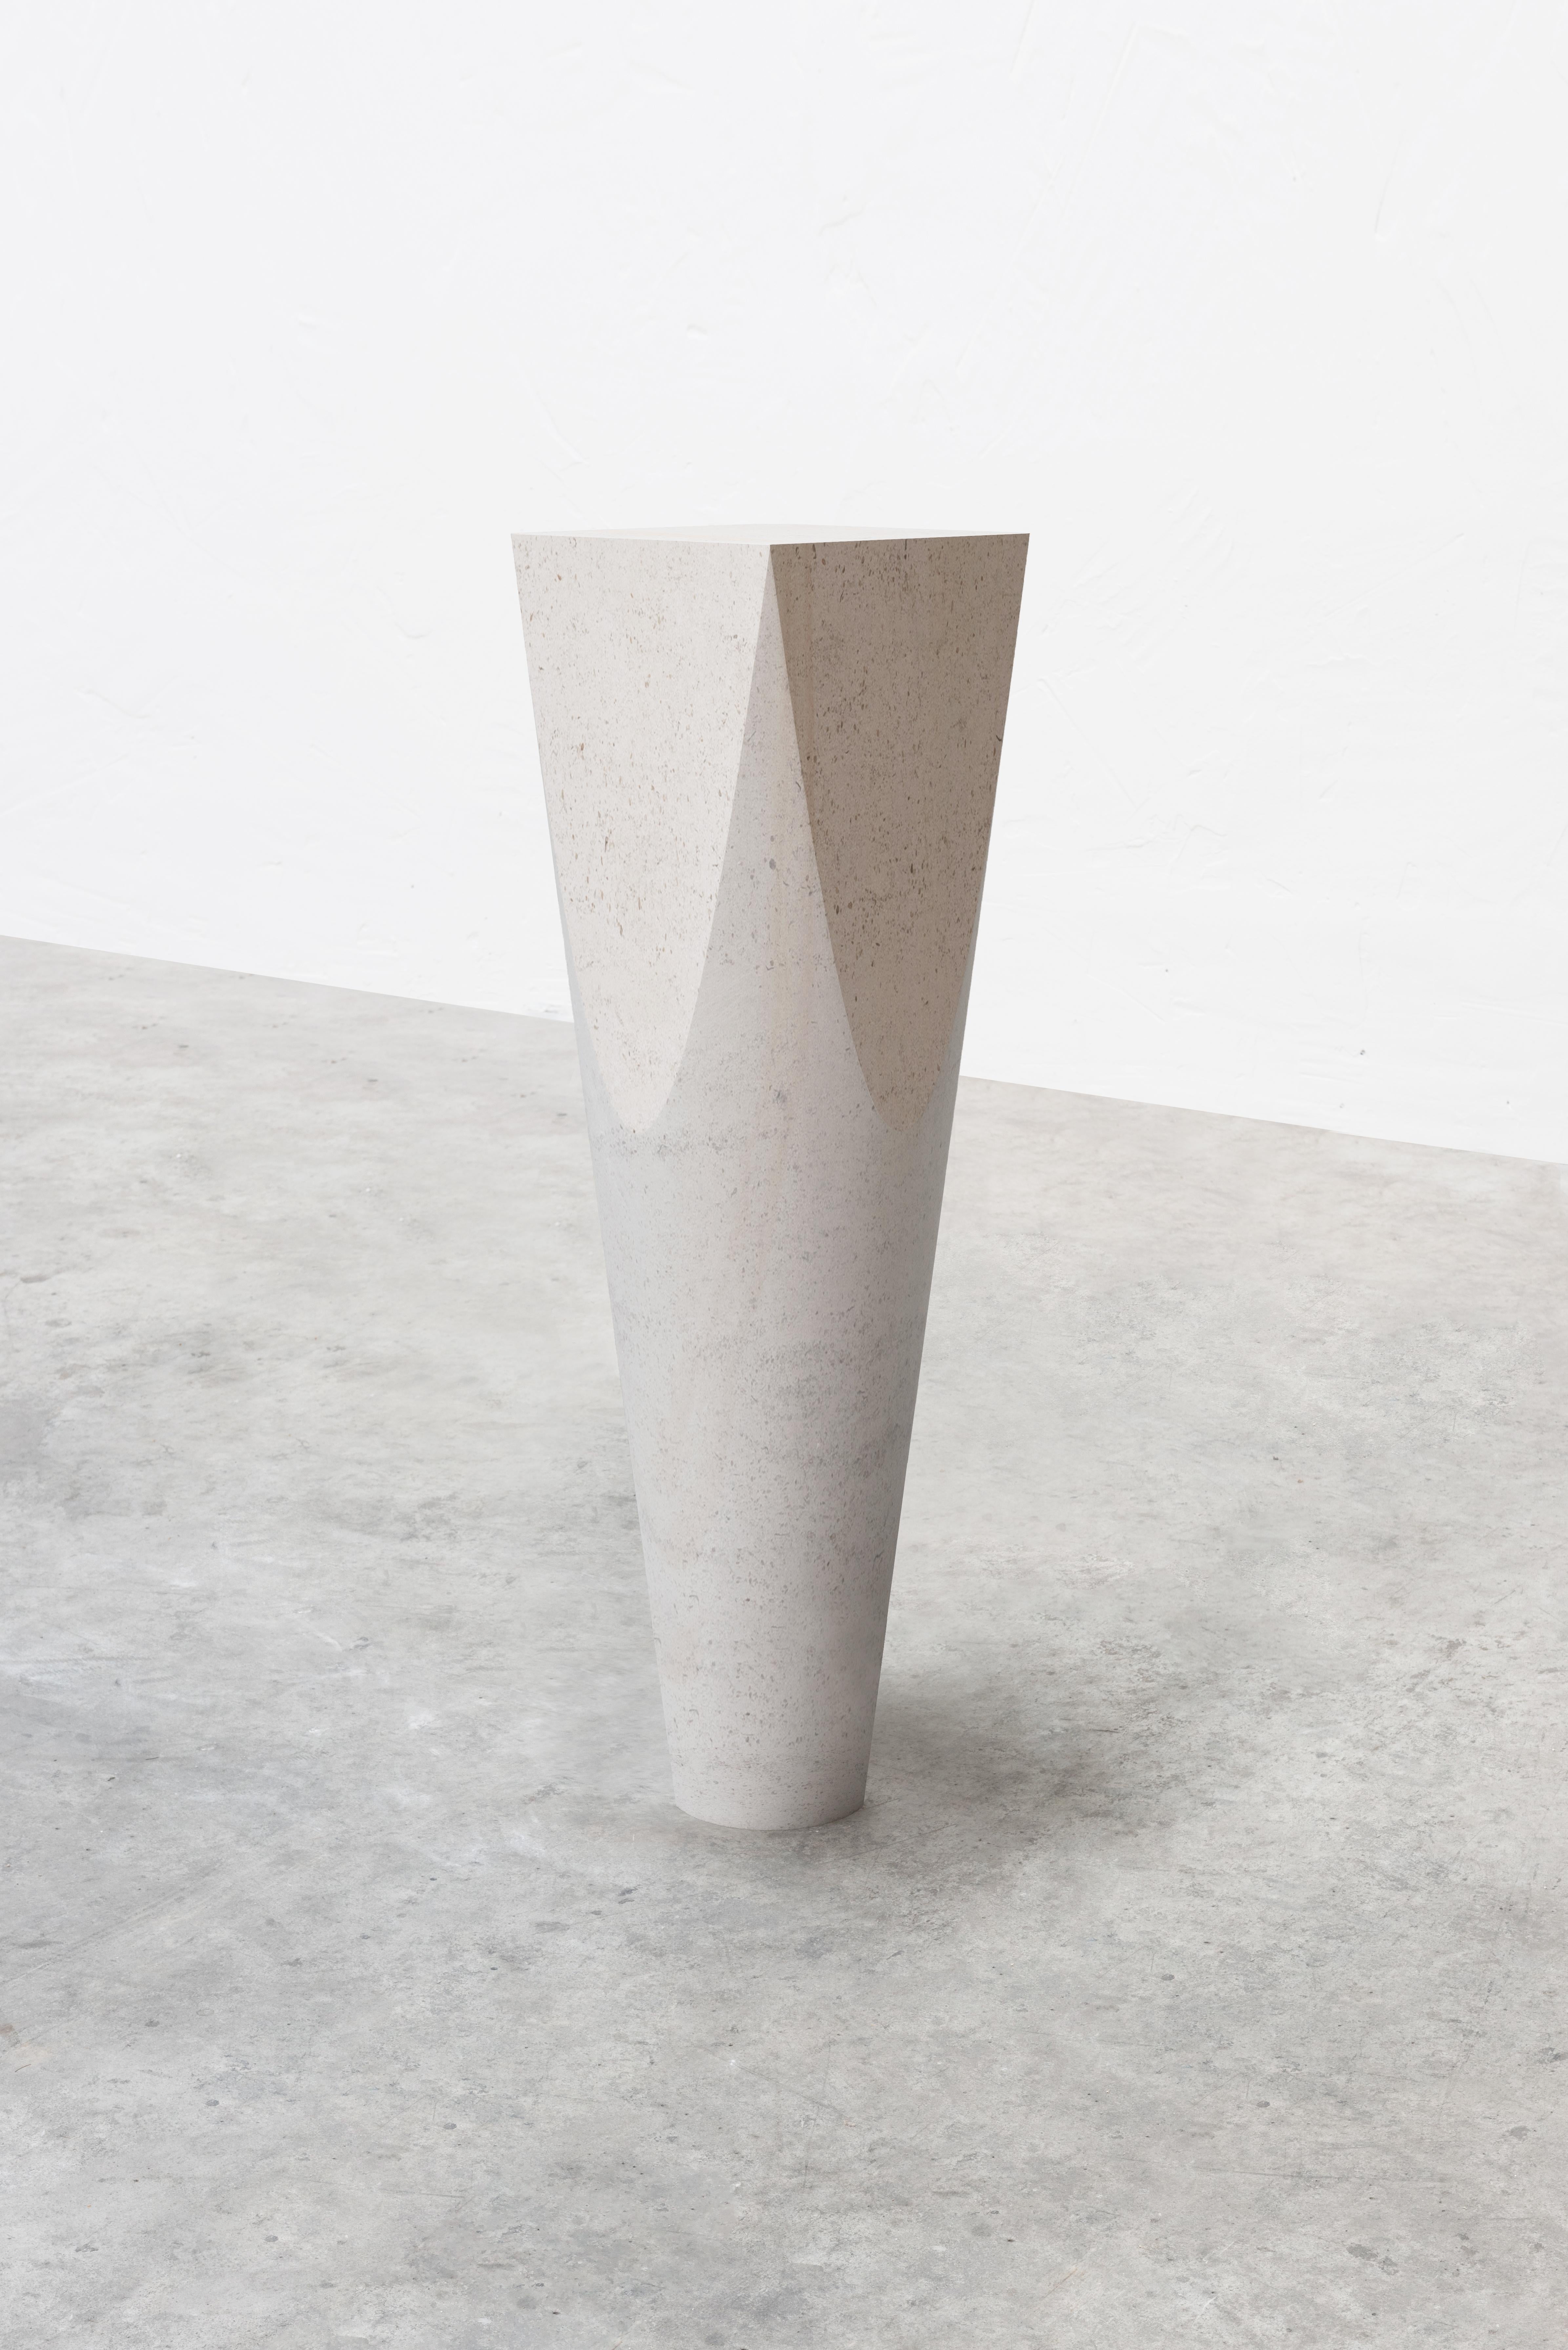 Arch Buffon marble column pedestal by Frédéric Saulou
Limited edition: 1 / 12
Designer: Frederic Saulou
Materials: Ornemental Limestone Buffon.
Dimensions: L 22 x W 22 x H 90 cm

Born in 1989, Frédéric Saulou, lives and works in Rennes, in